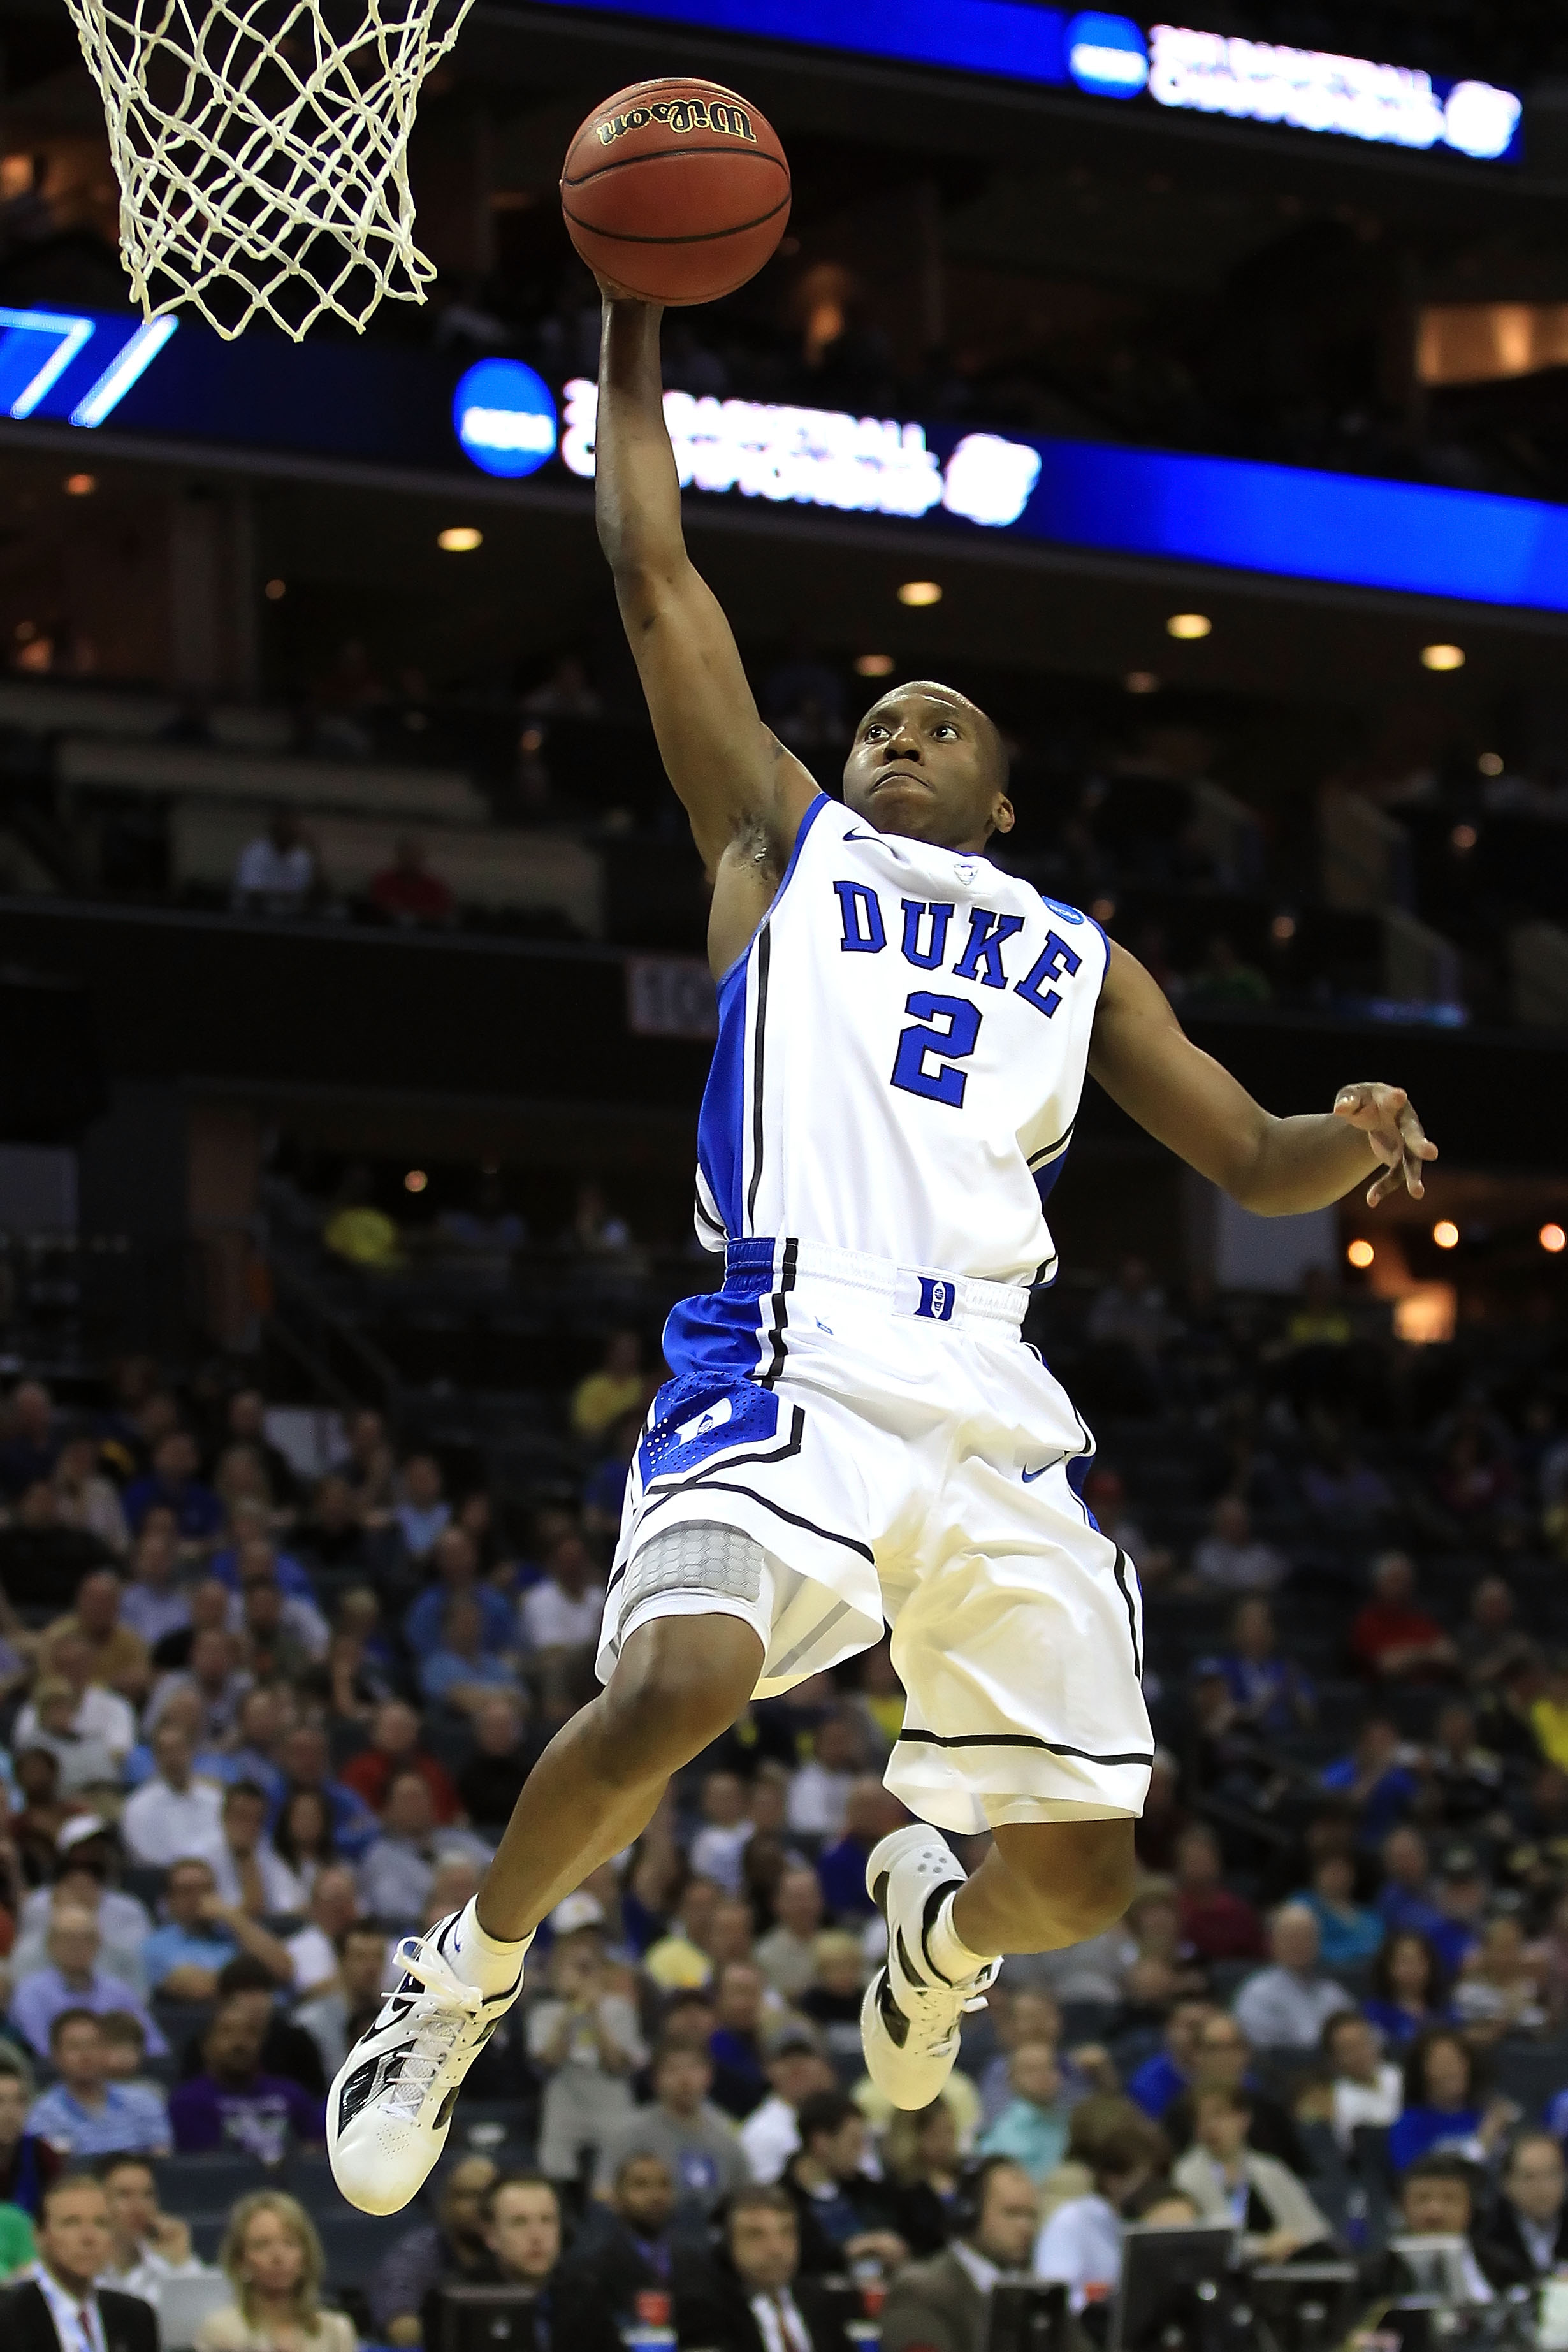 CHARLOTTE, NC - MARCH 18:  Nolan Smith #2 of the Duke Blue Devils dunks the ball in the second half while taking on the Hampton Pirates during the second round of the 2011 NCAA men's basketball tournament at Time Warner Cable Arena on March 18, 2011 in Ch